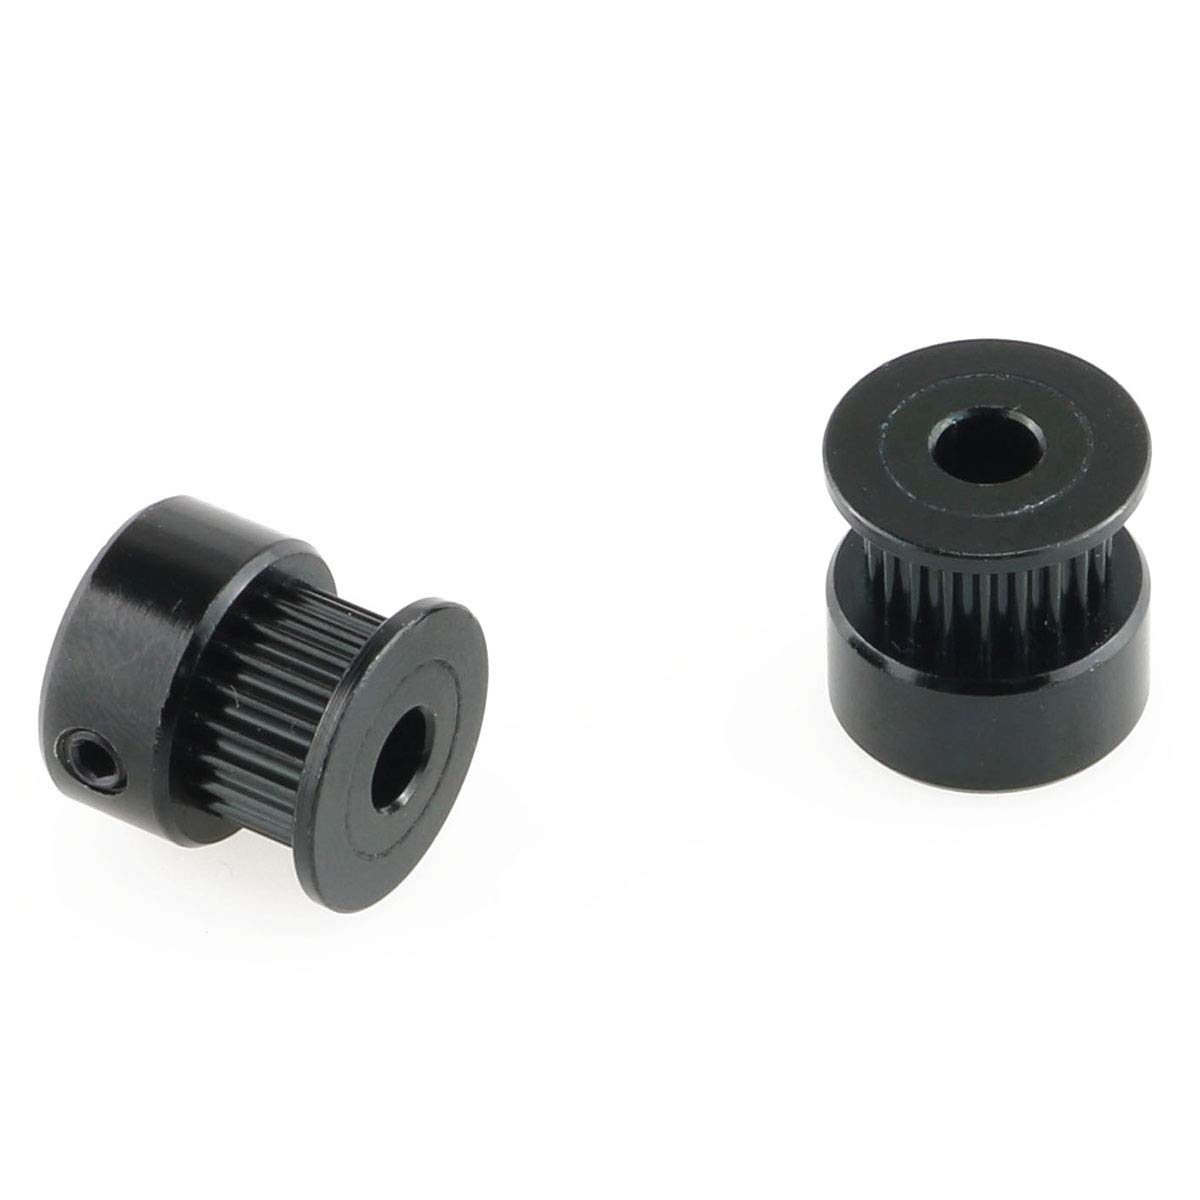 GT2 Pulley 20T 5mm Bore for Creality Ender 3 V2 Pro 3s CR10 CR-10S CR6 SE 3D Printer Parts 6mm Width Belt 20 Teeth 2GT